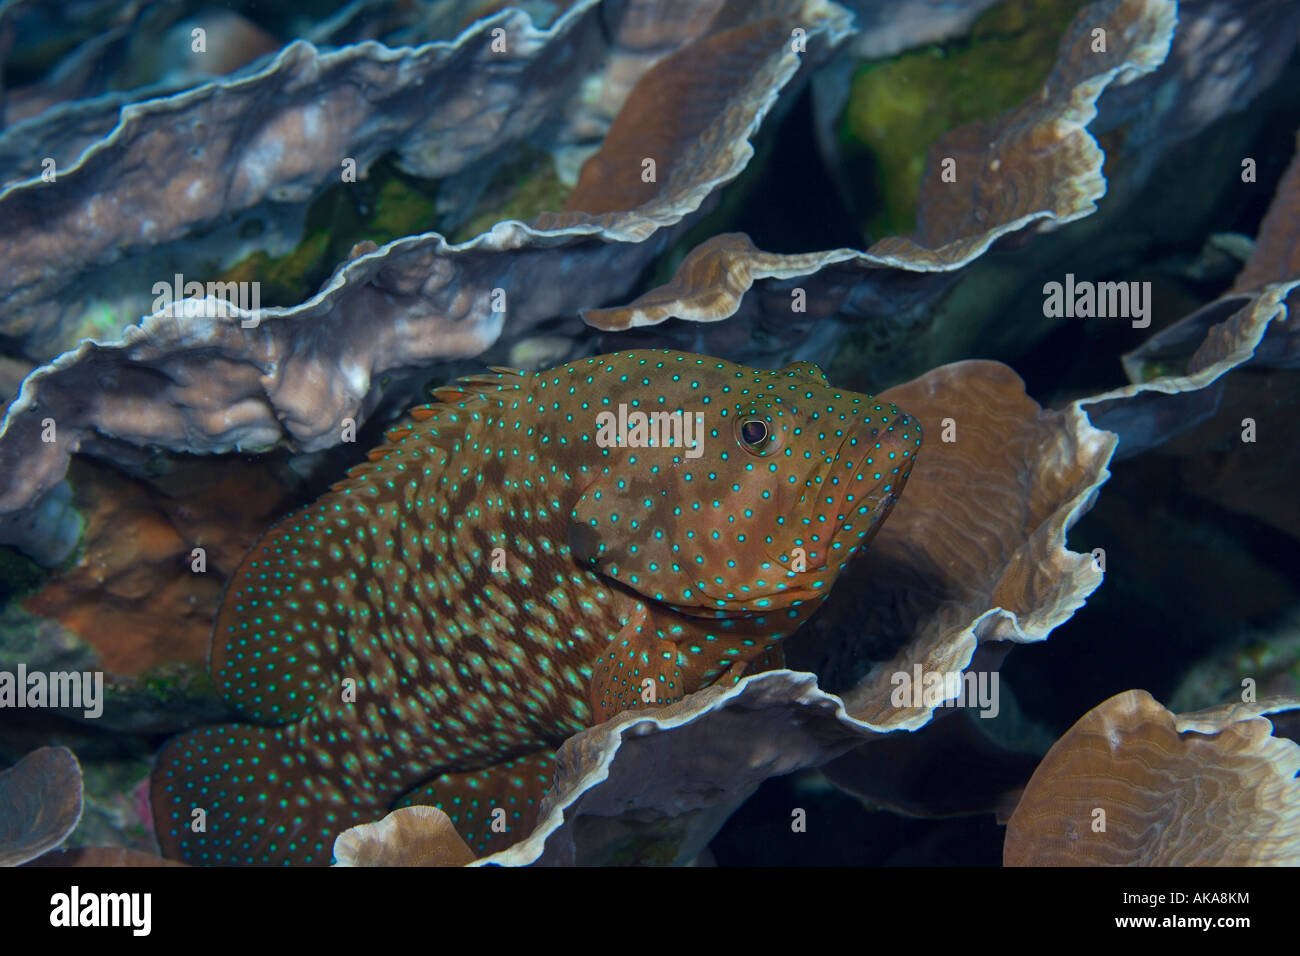 A Blue spotted grouper, Cephalopholis cyanostigma , rests on a bed of hard coral, Indonesia Stock Photo